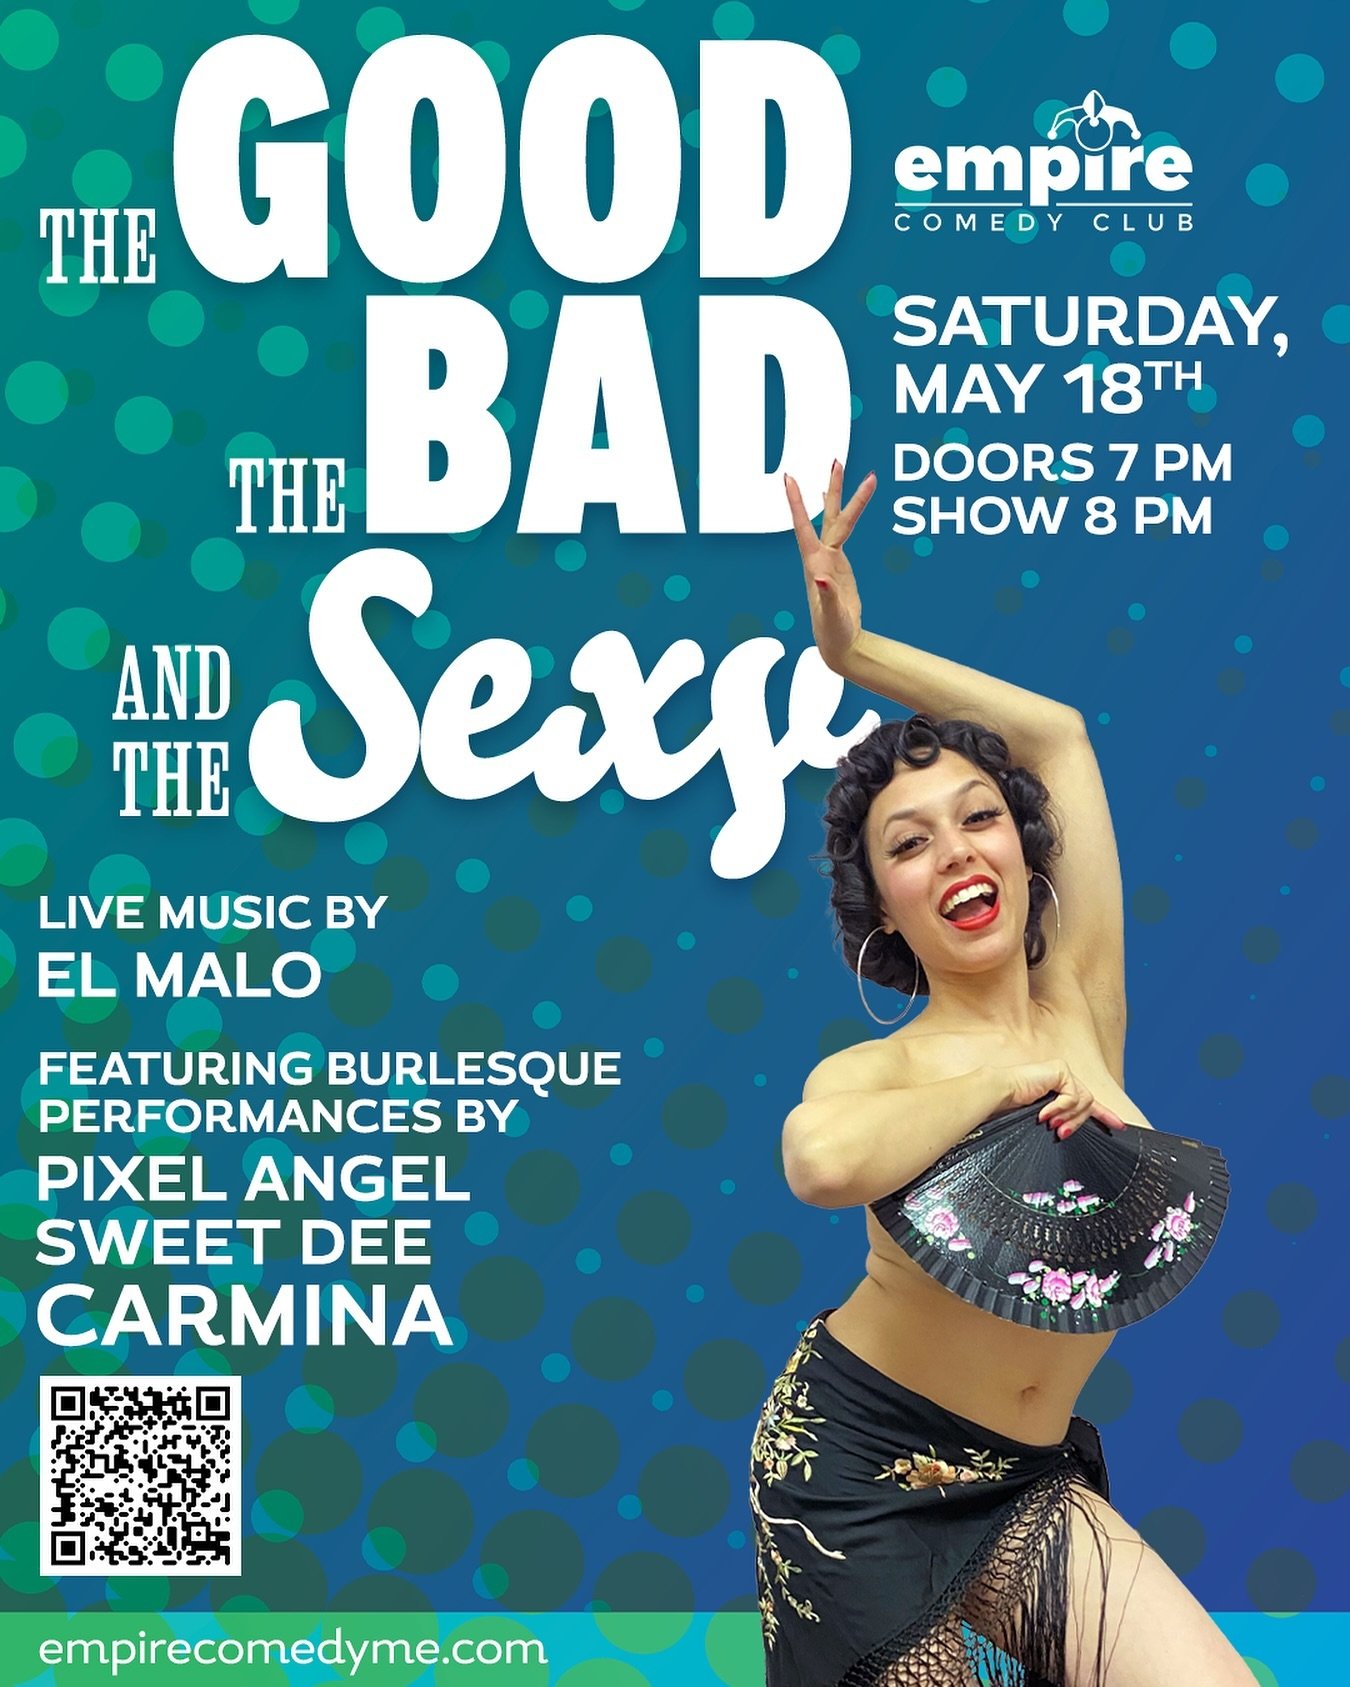 TONIGHT, SAT. MAY 18! The Good, The Bad, and The Sexy! Featuring live music and burlesque performances! Doors at 7pm, show starts at 8pm! 
&bull;
#empirecomedyclub #comedyclub #maine #portlandmaine #thingstodoinmaine #livemusic #burlesque #performanc